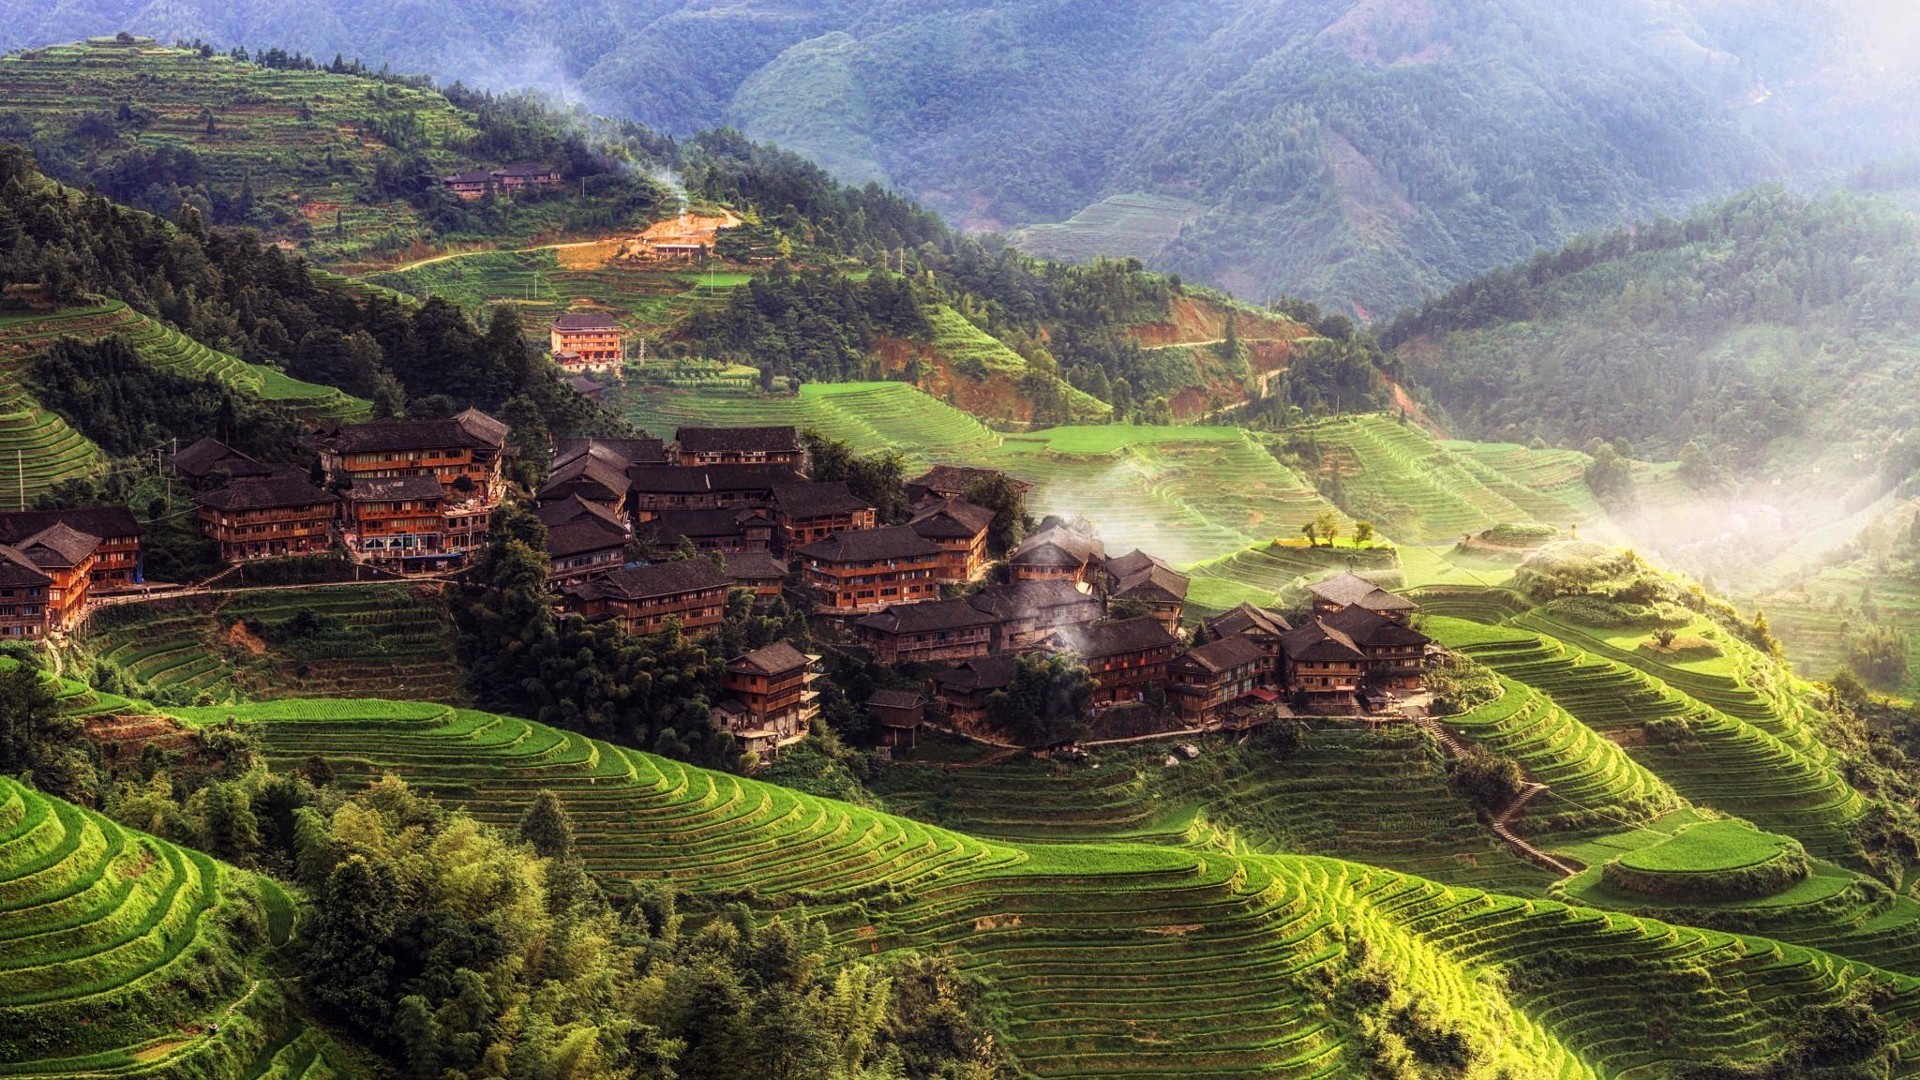 nature, Landscape, Trees, China, Asia, Rice Paddy, Morning, Mist, House, Hill, Forest, Terraced Field, Village Wallpaper